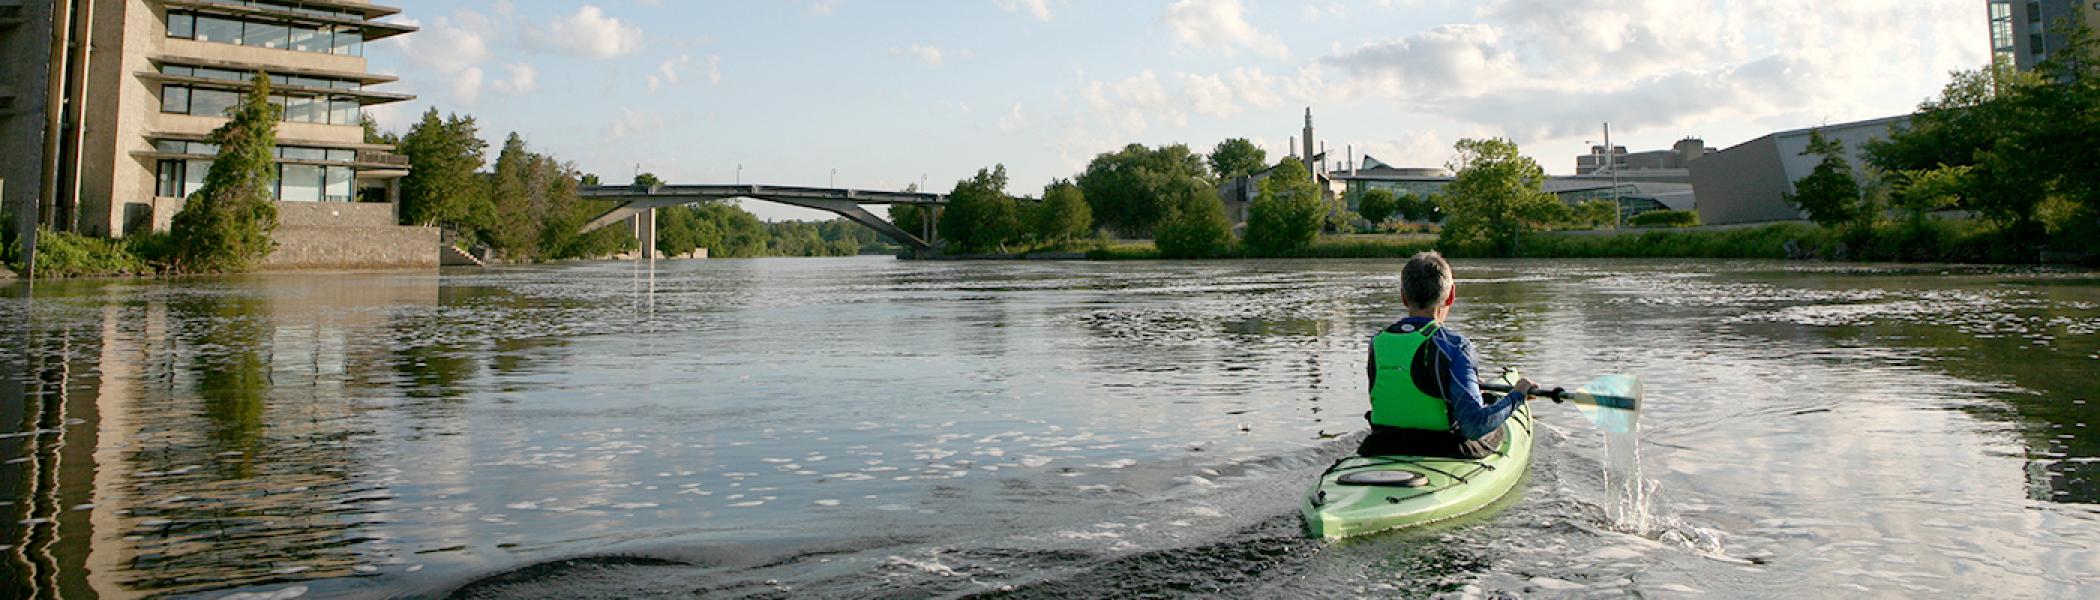 Dr. Leo Groarke kayaking on the Otonabee river in front of the Bata Library facing away from the camera towards the Faryon bridge